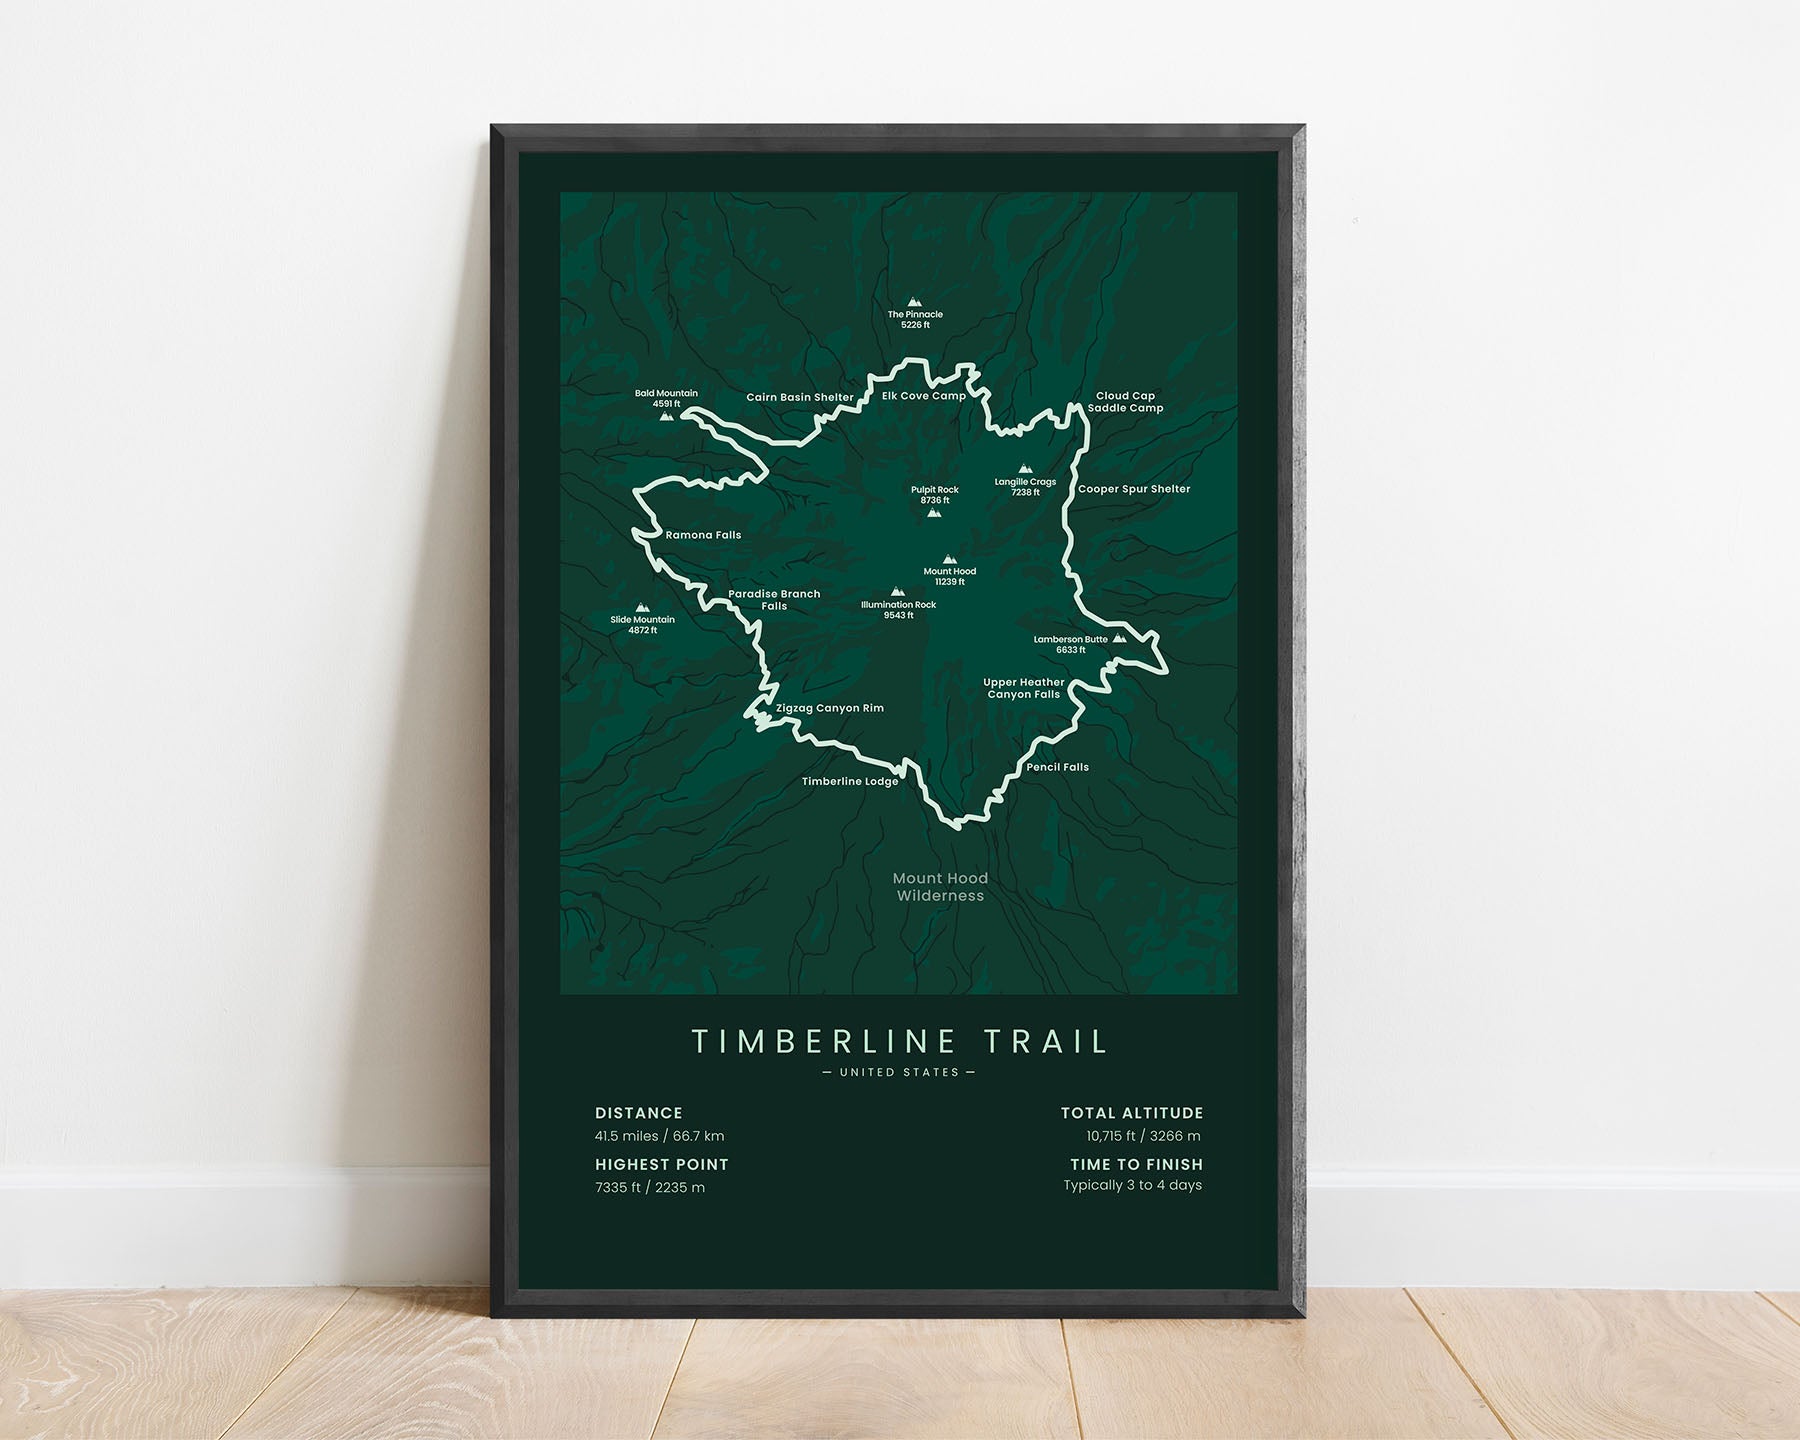 Timberline Trail (Mount Hood Loop, in Oregon, United States) minimalist map poster with black frame and green background